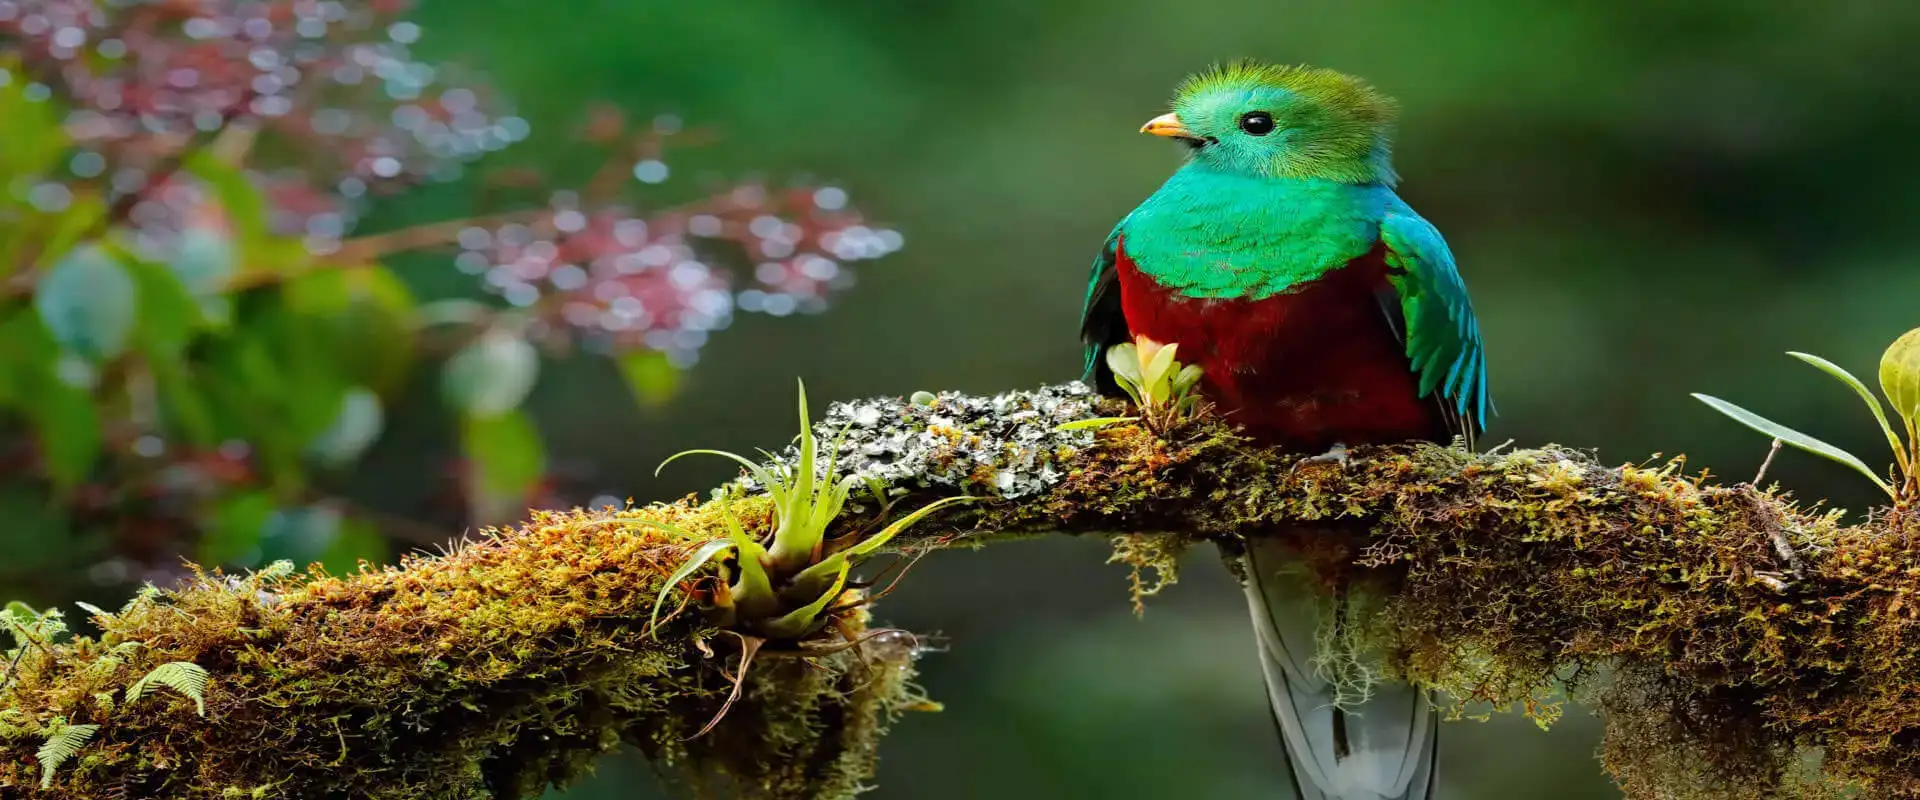 Quetzal and Highland Expedition Bird Watching Tour | Costa Rica